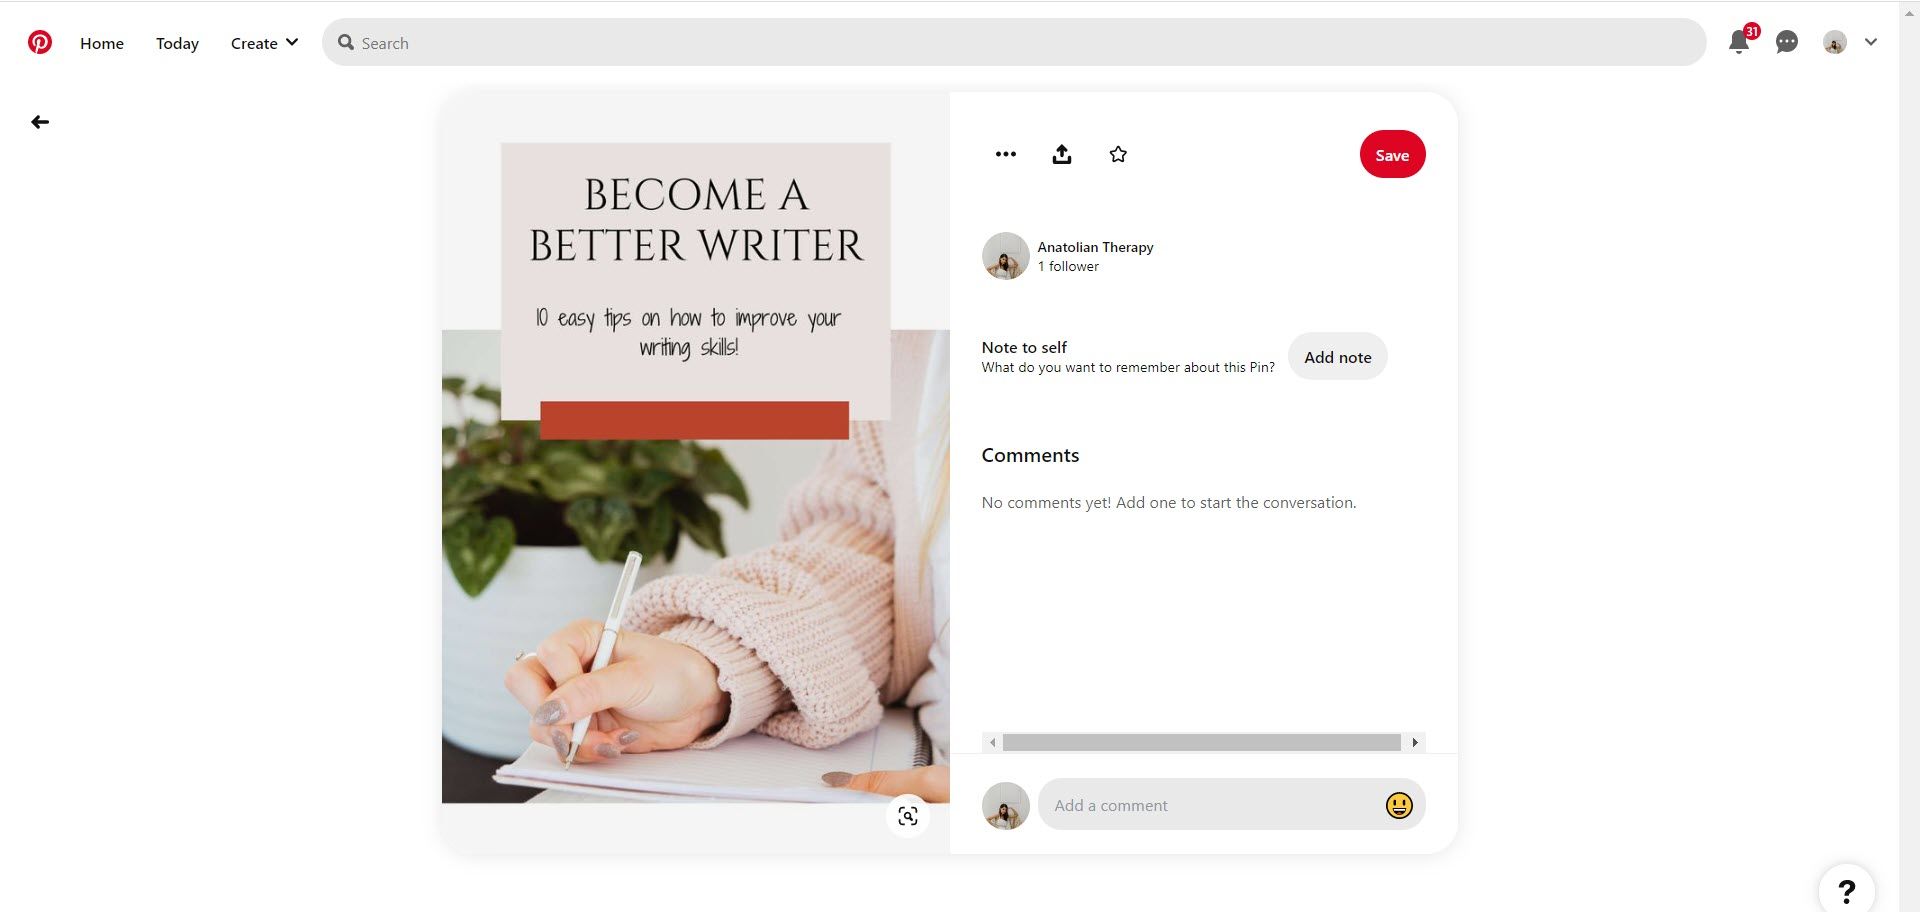 Sell your freelance services on Pinterest